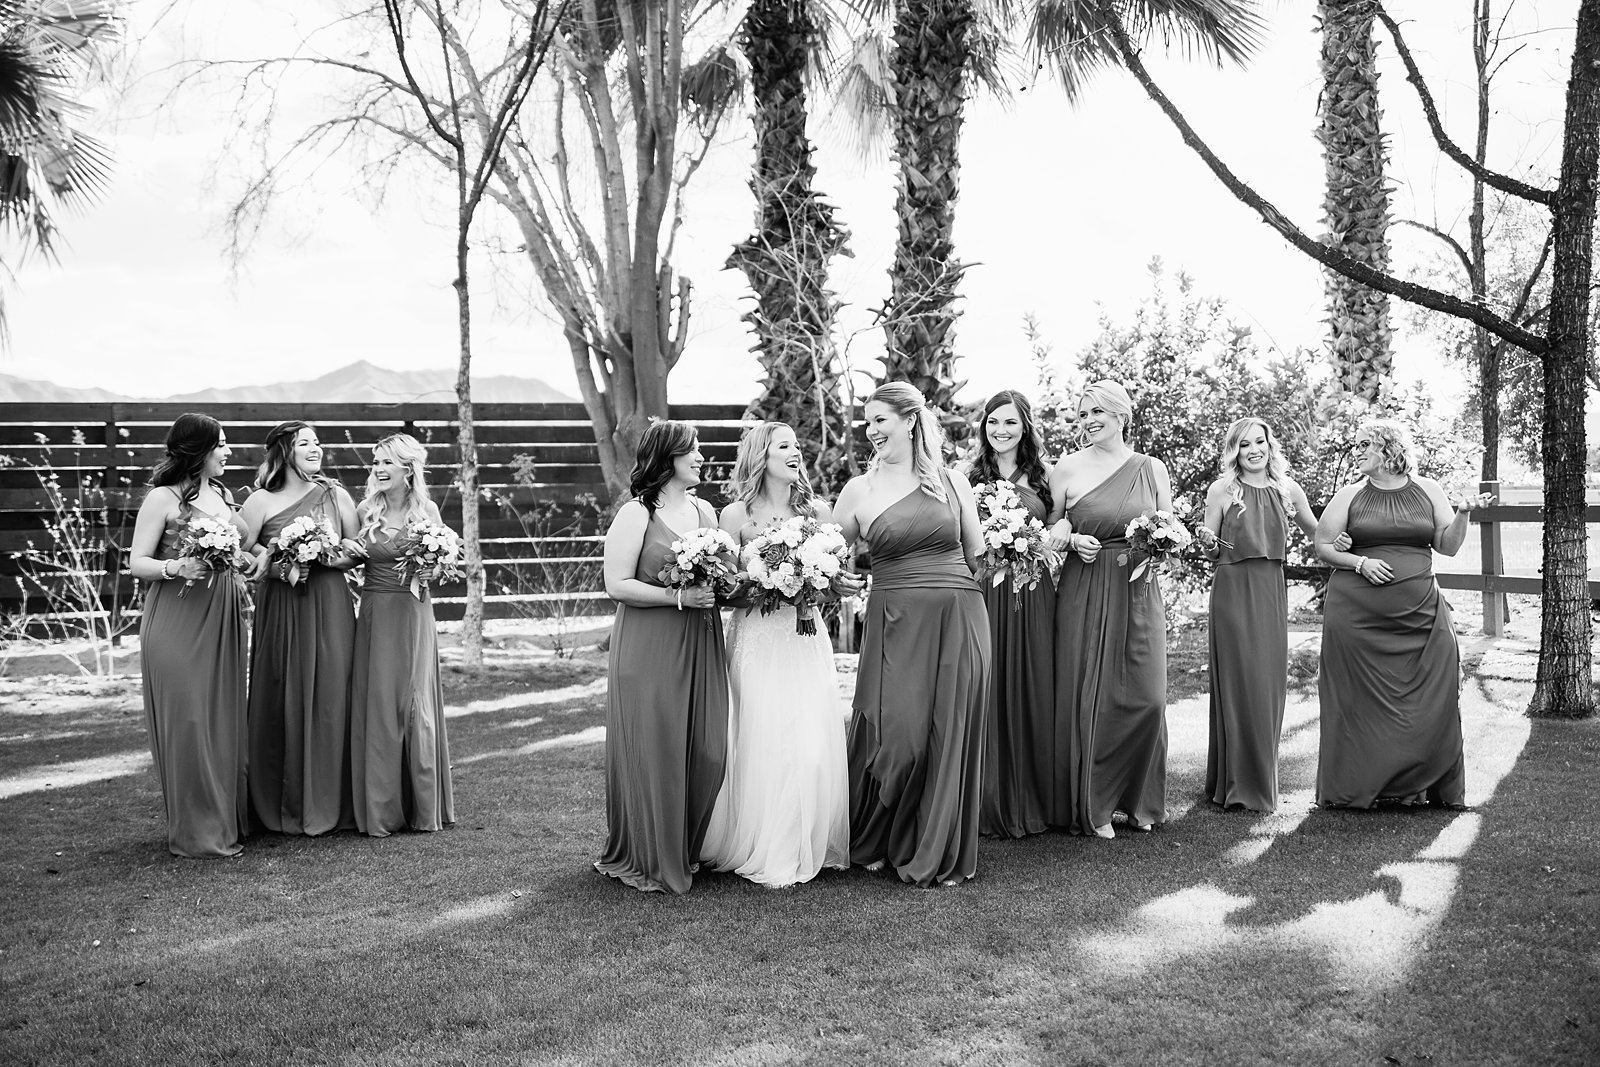 Bride and bridesmaids together at a Venue At The Grove wedding by Arizona wedding photographer PMA Photography.